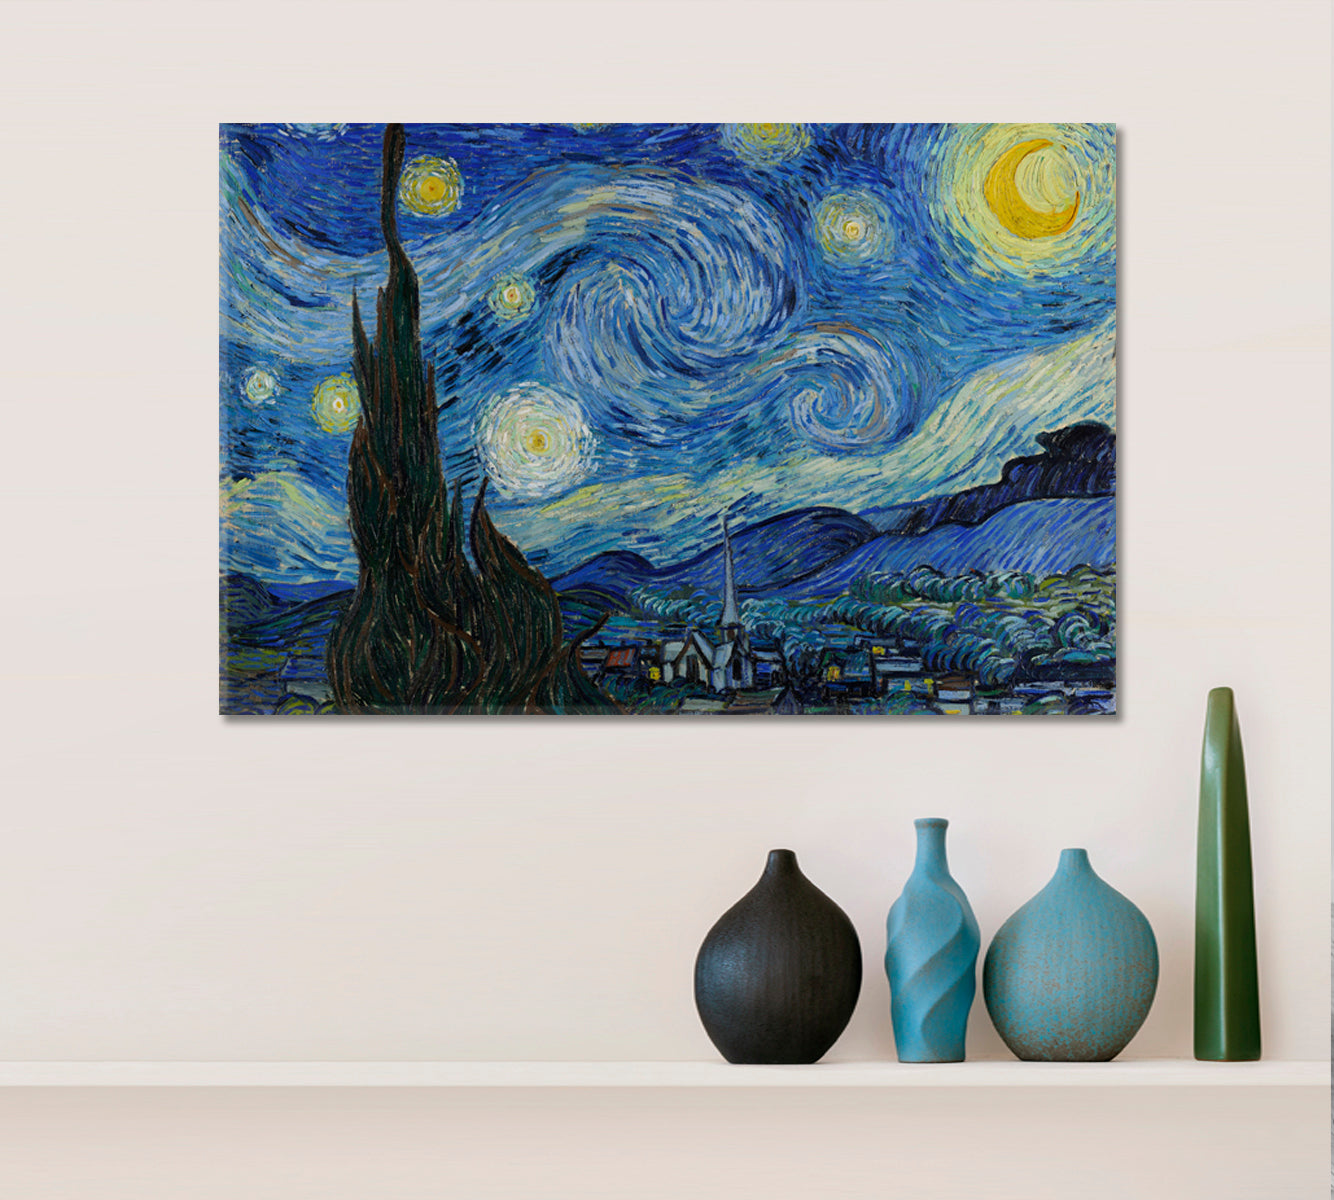 The Starry Night Vincent van Gogh Masterpieces Reproduction Contemporary Art Artesty 1 panel 24" x 16" 